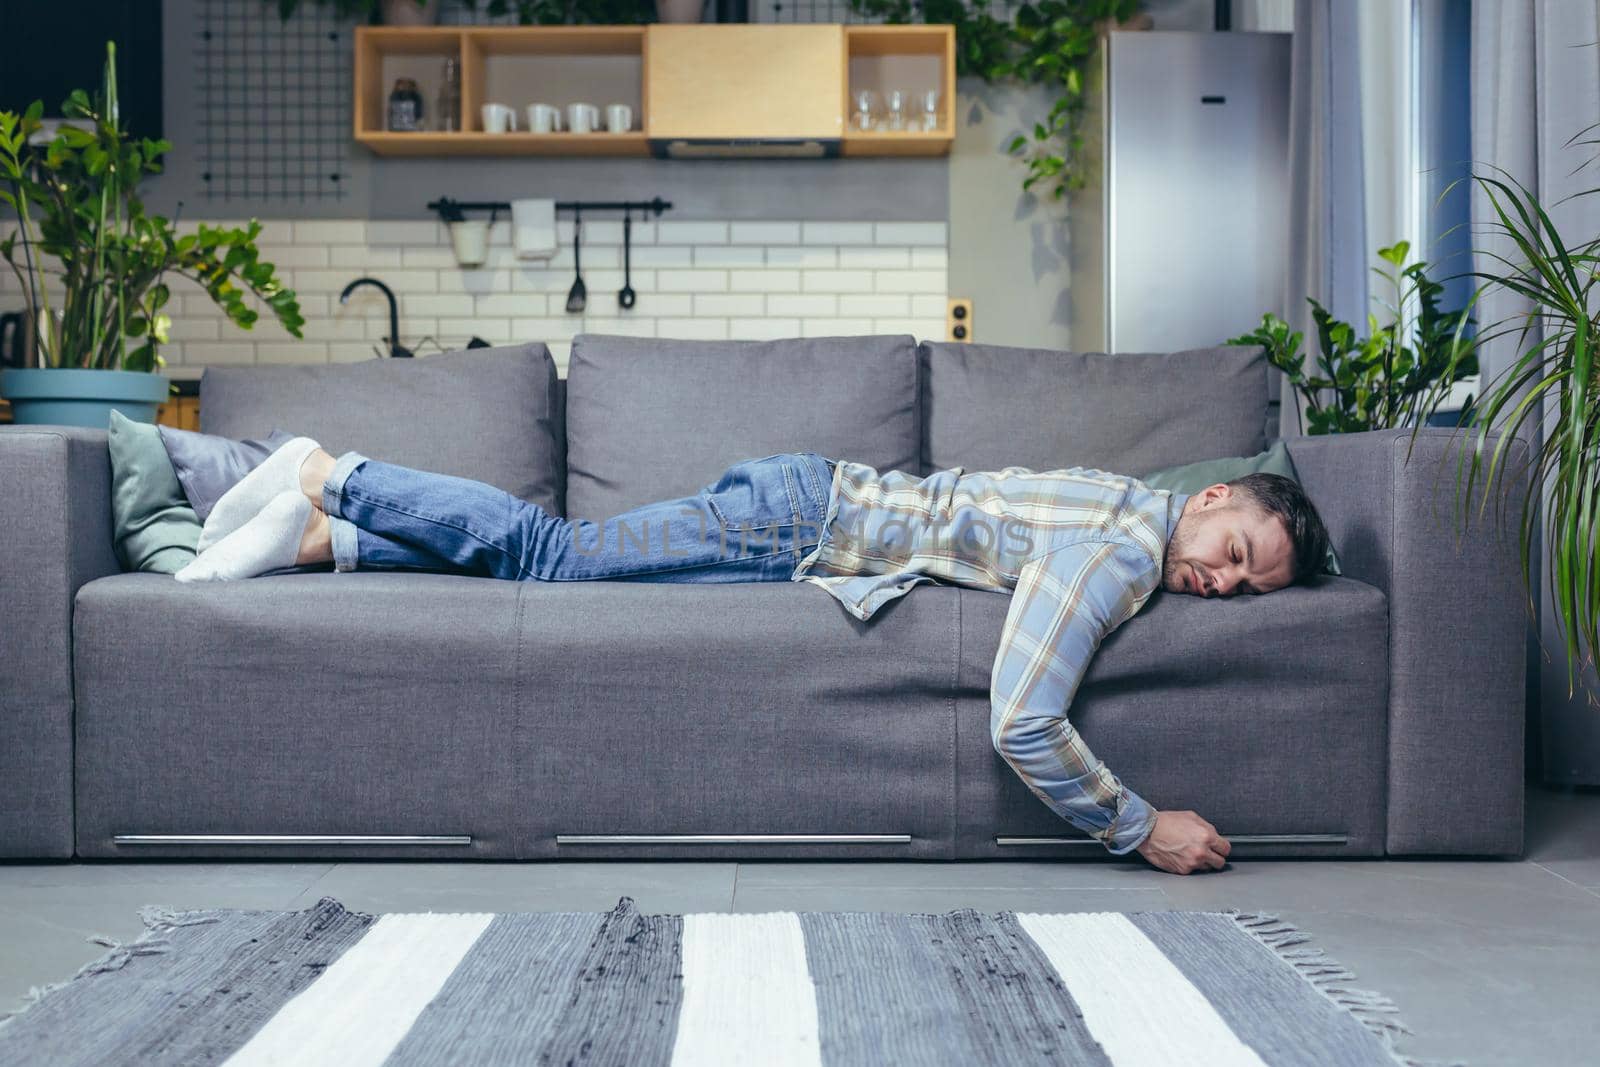 Depressed man tired after work sleeping on sofa at home